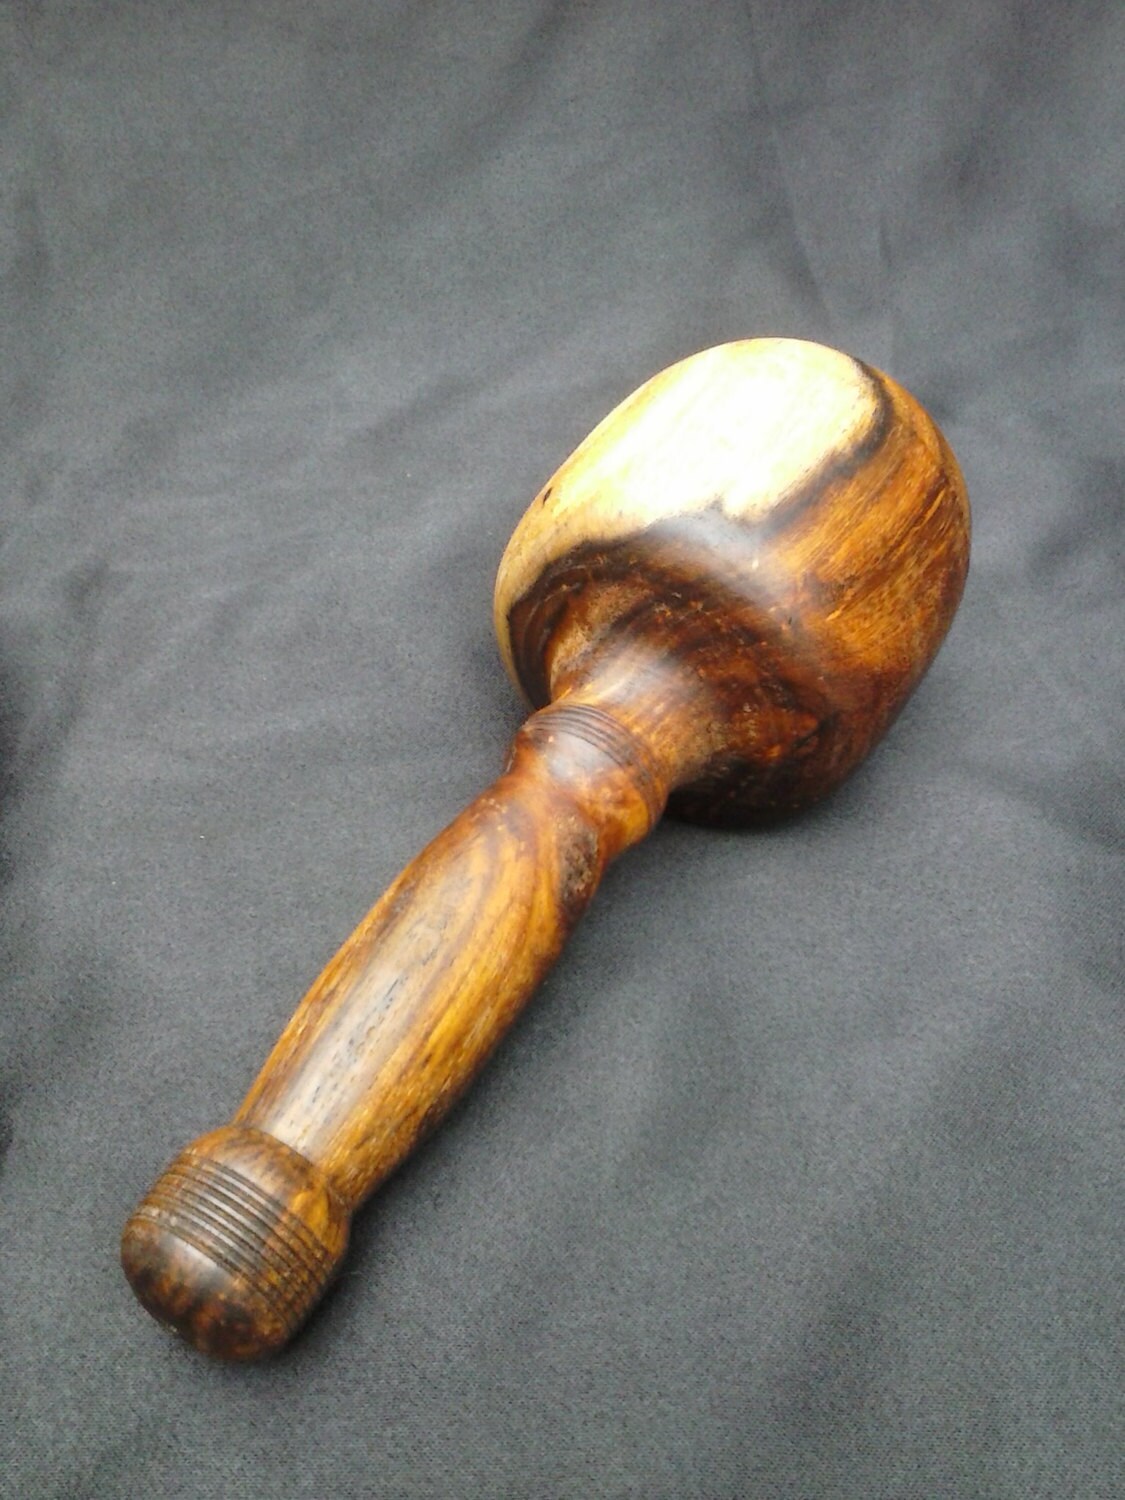 Woodworking mallet turned